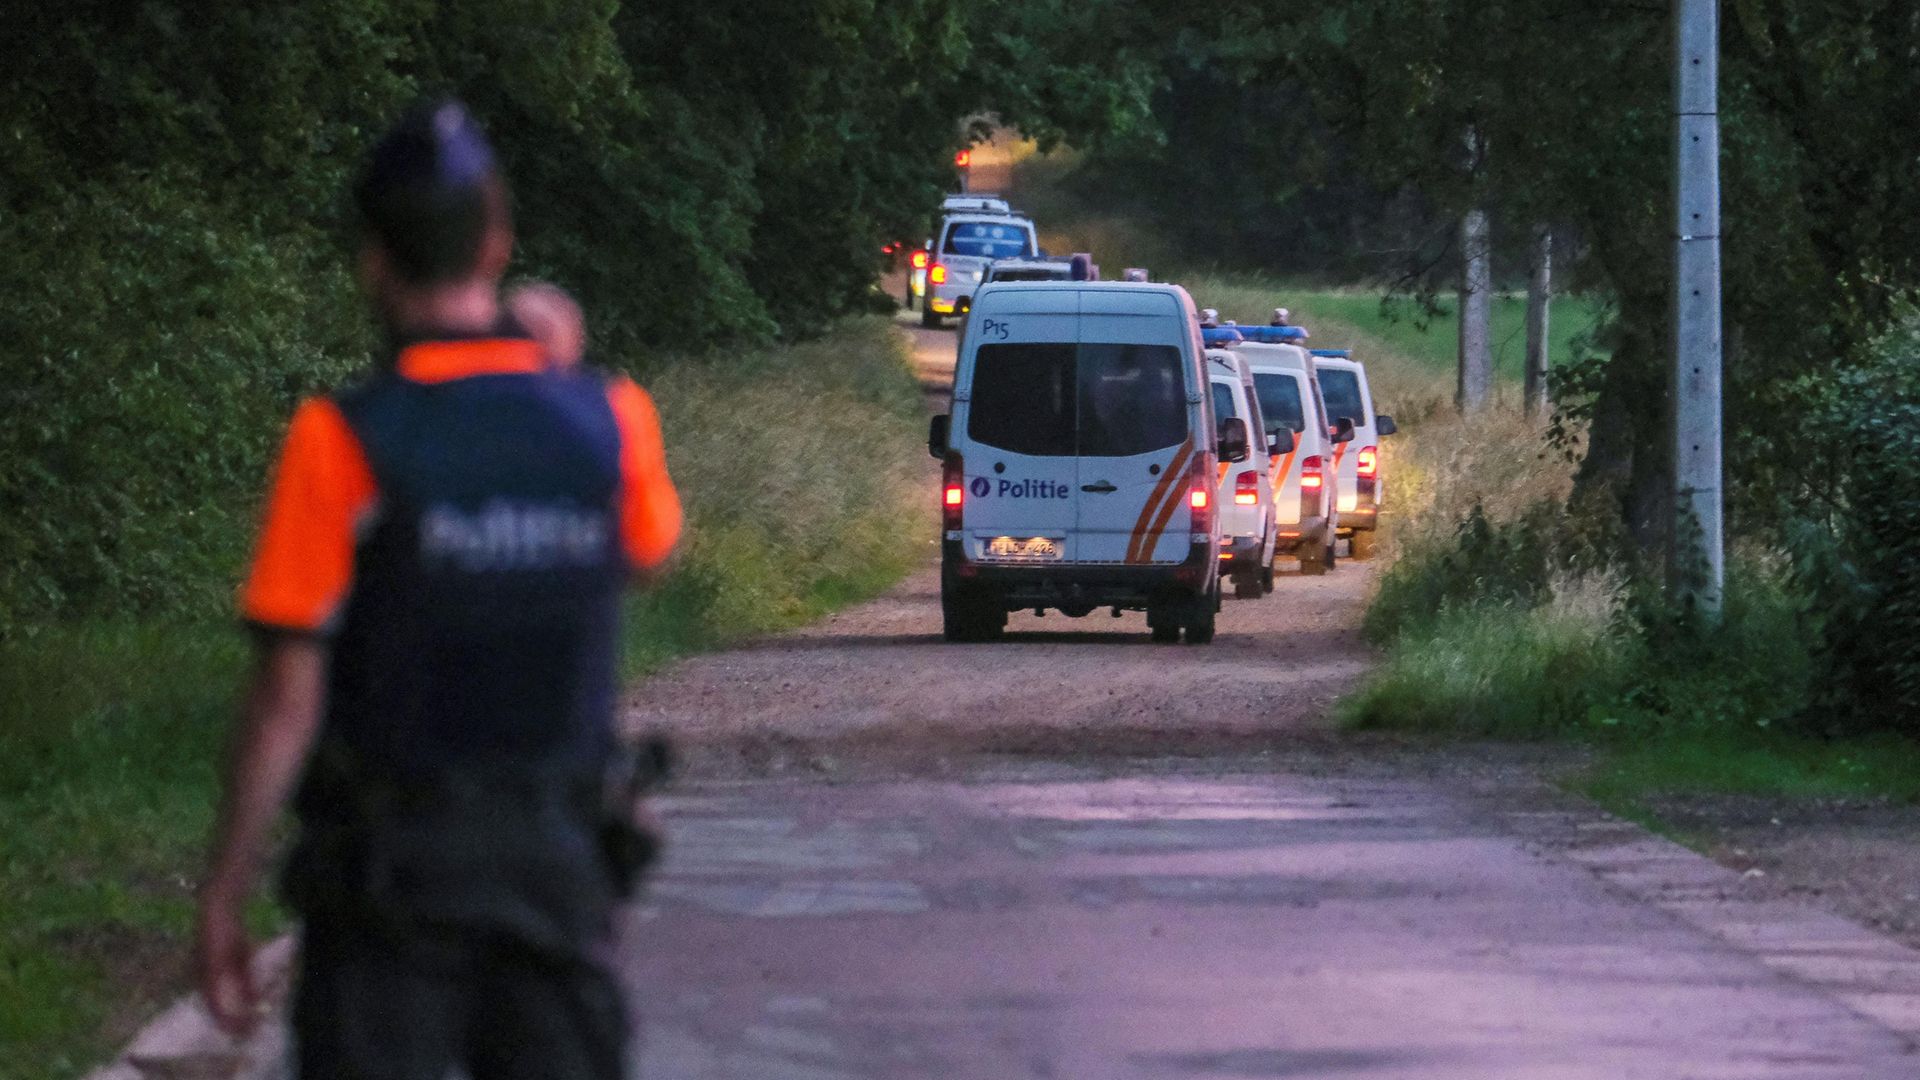 Police vehicles arrive near the spot where the body of Jurgen Conings was found in the Dilserbos forest area of eastern Belgium - Credit: BELGA/AFP via Getty Images